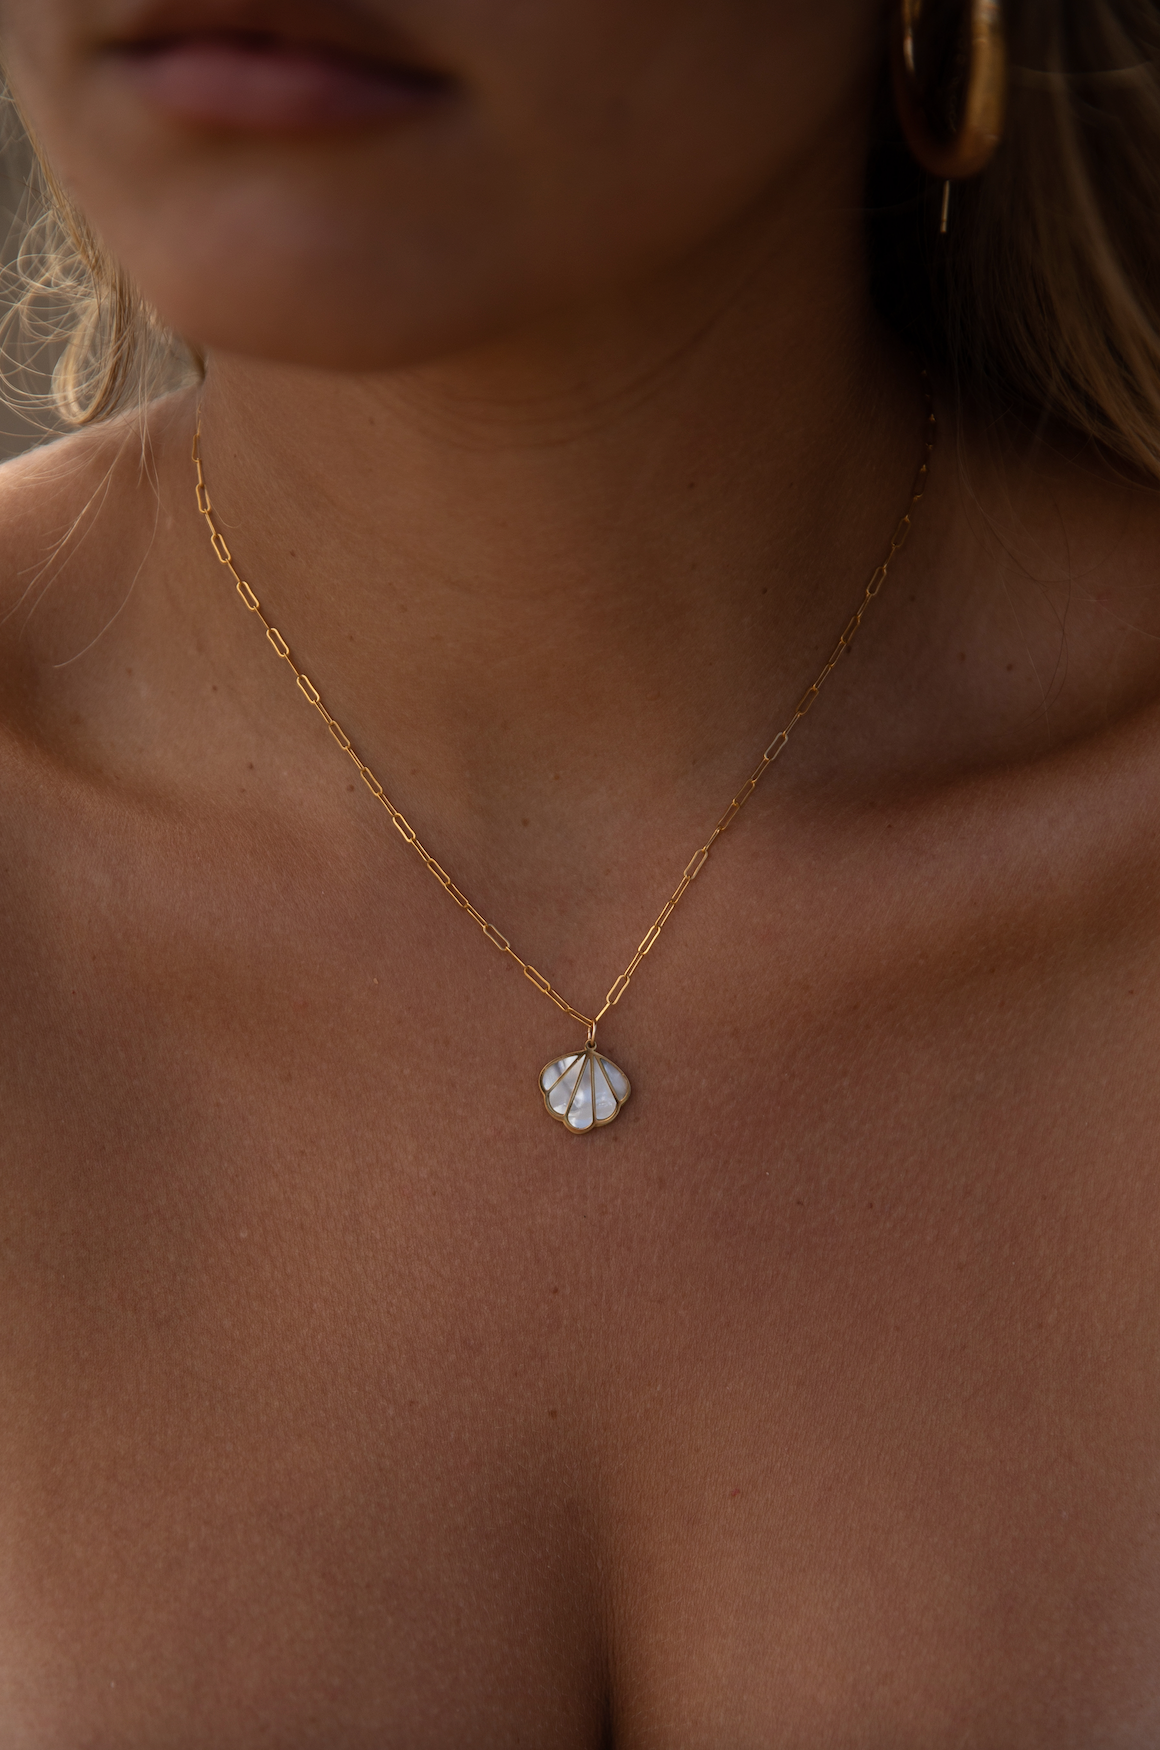 The Gold Pearly Shell Necklace